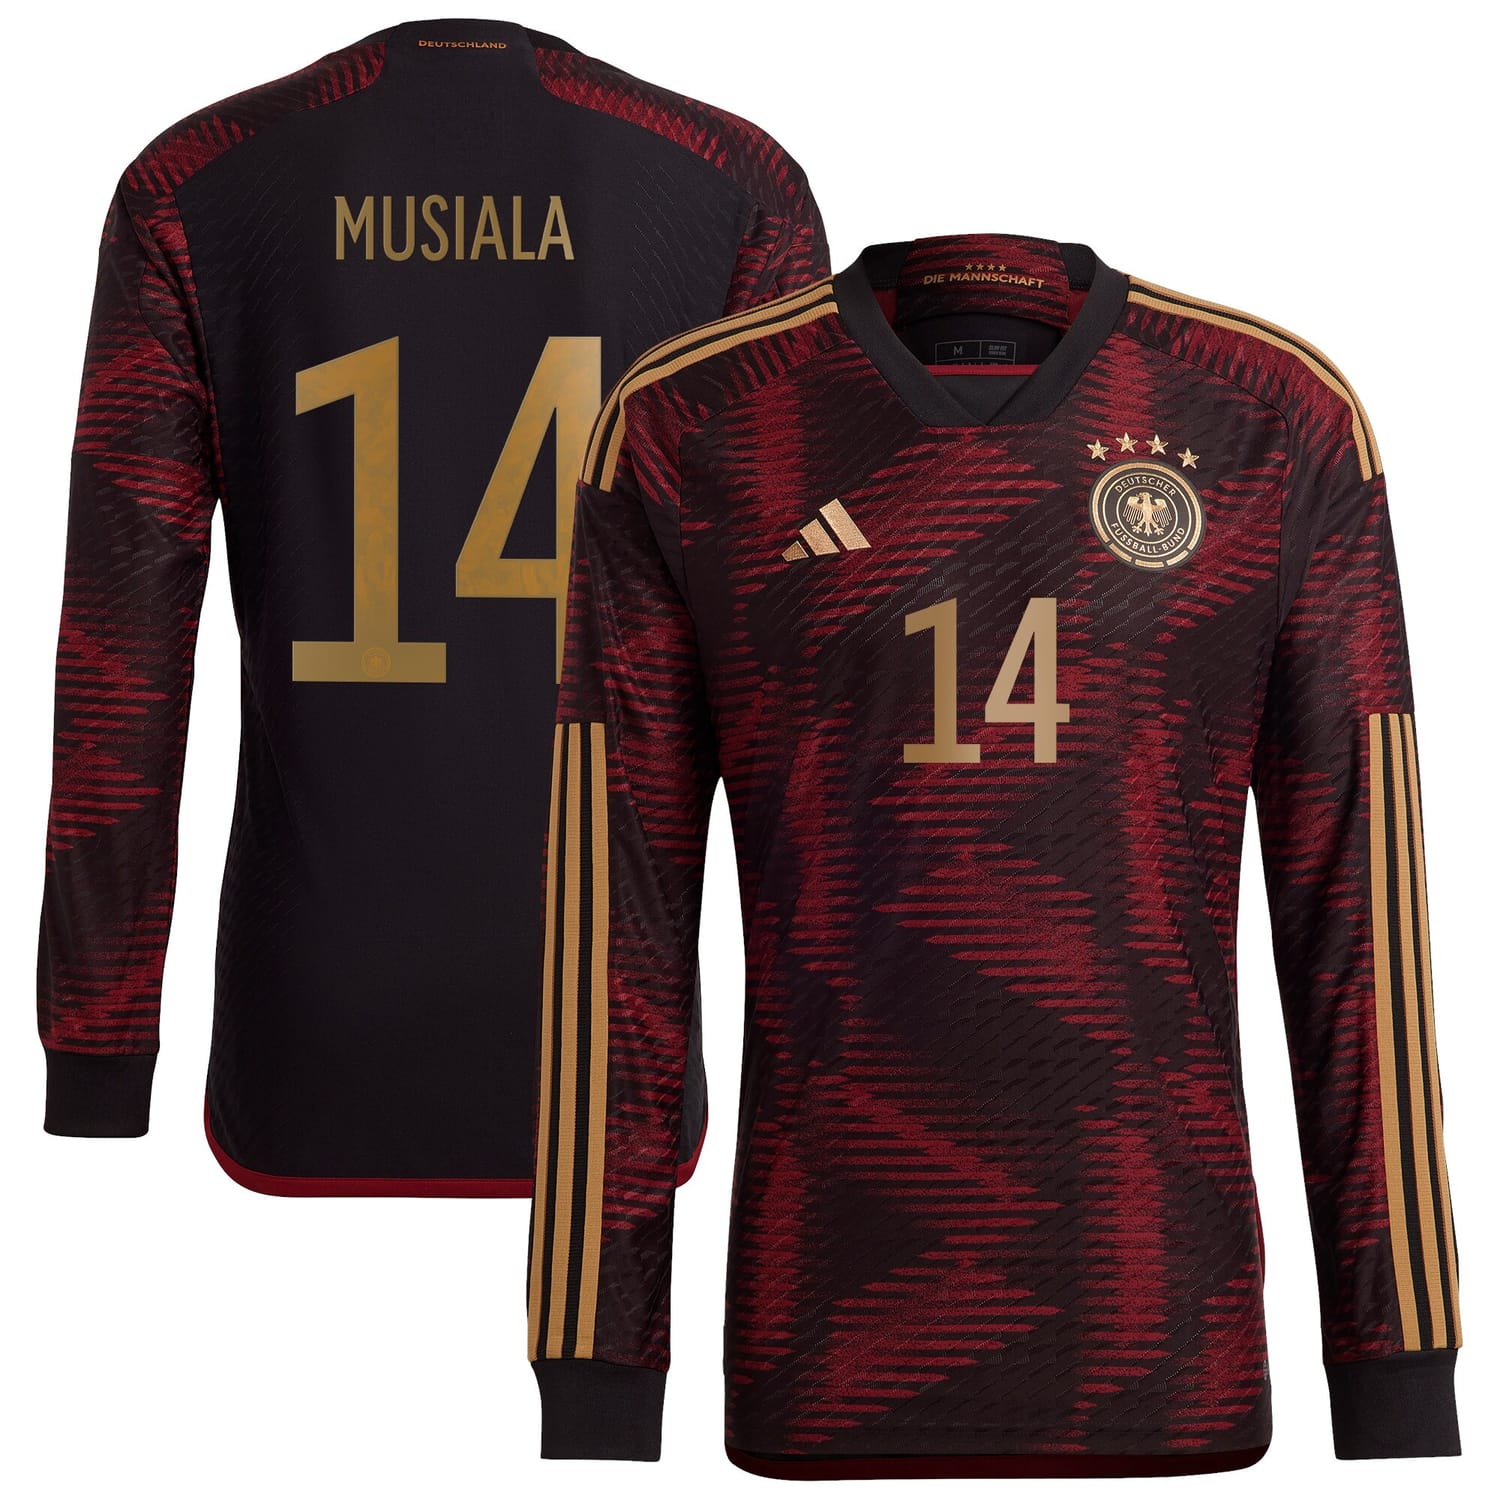 Germany National Team Away Authentic Jersey Shirt Long Sleeve player Jamal Musiala 14 printing for Men